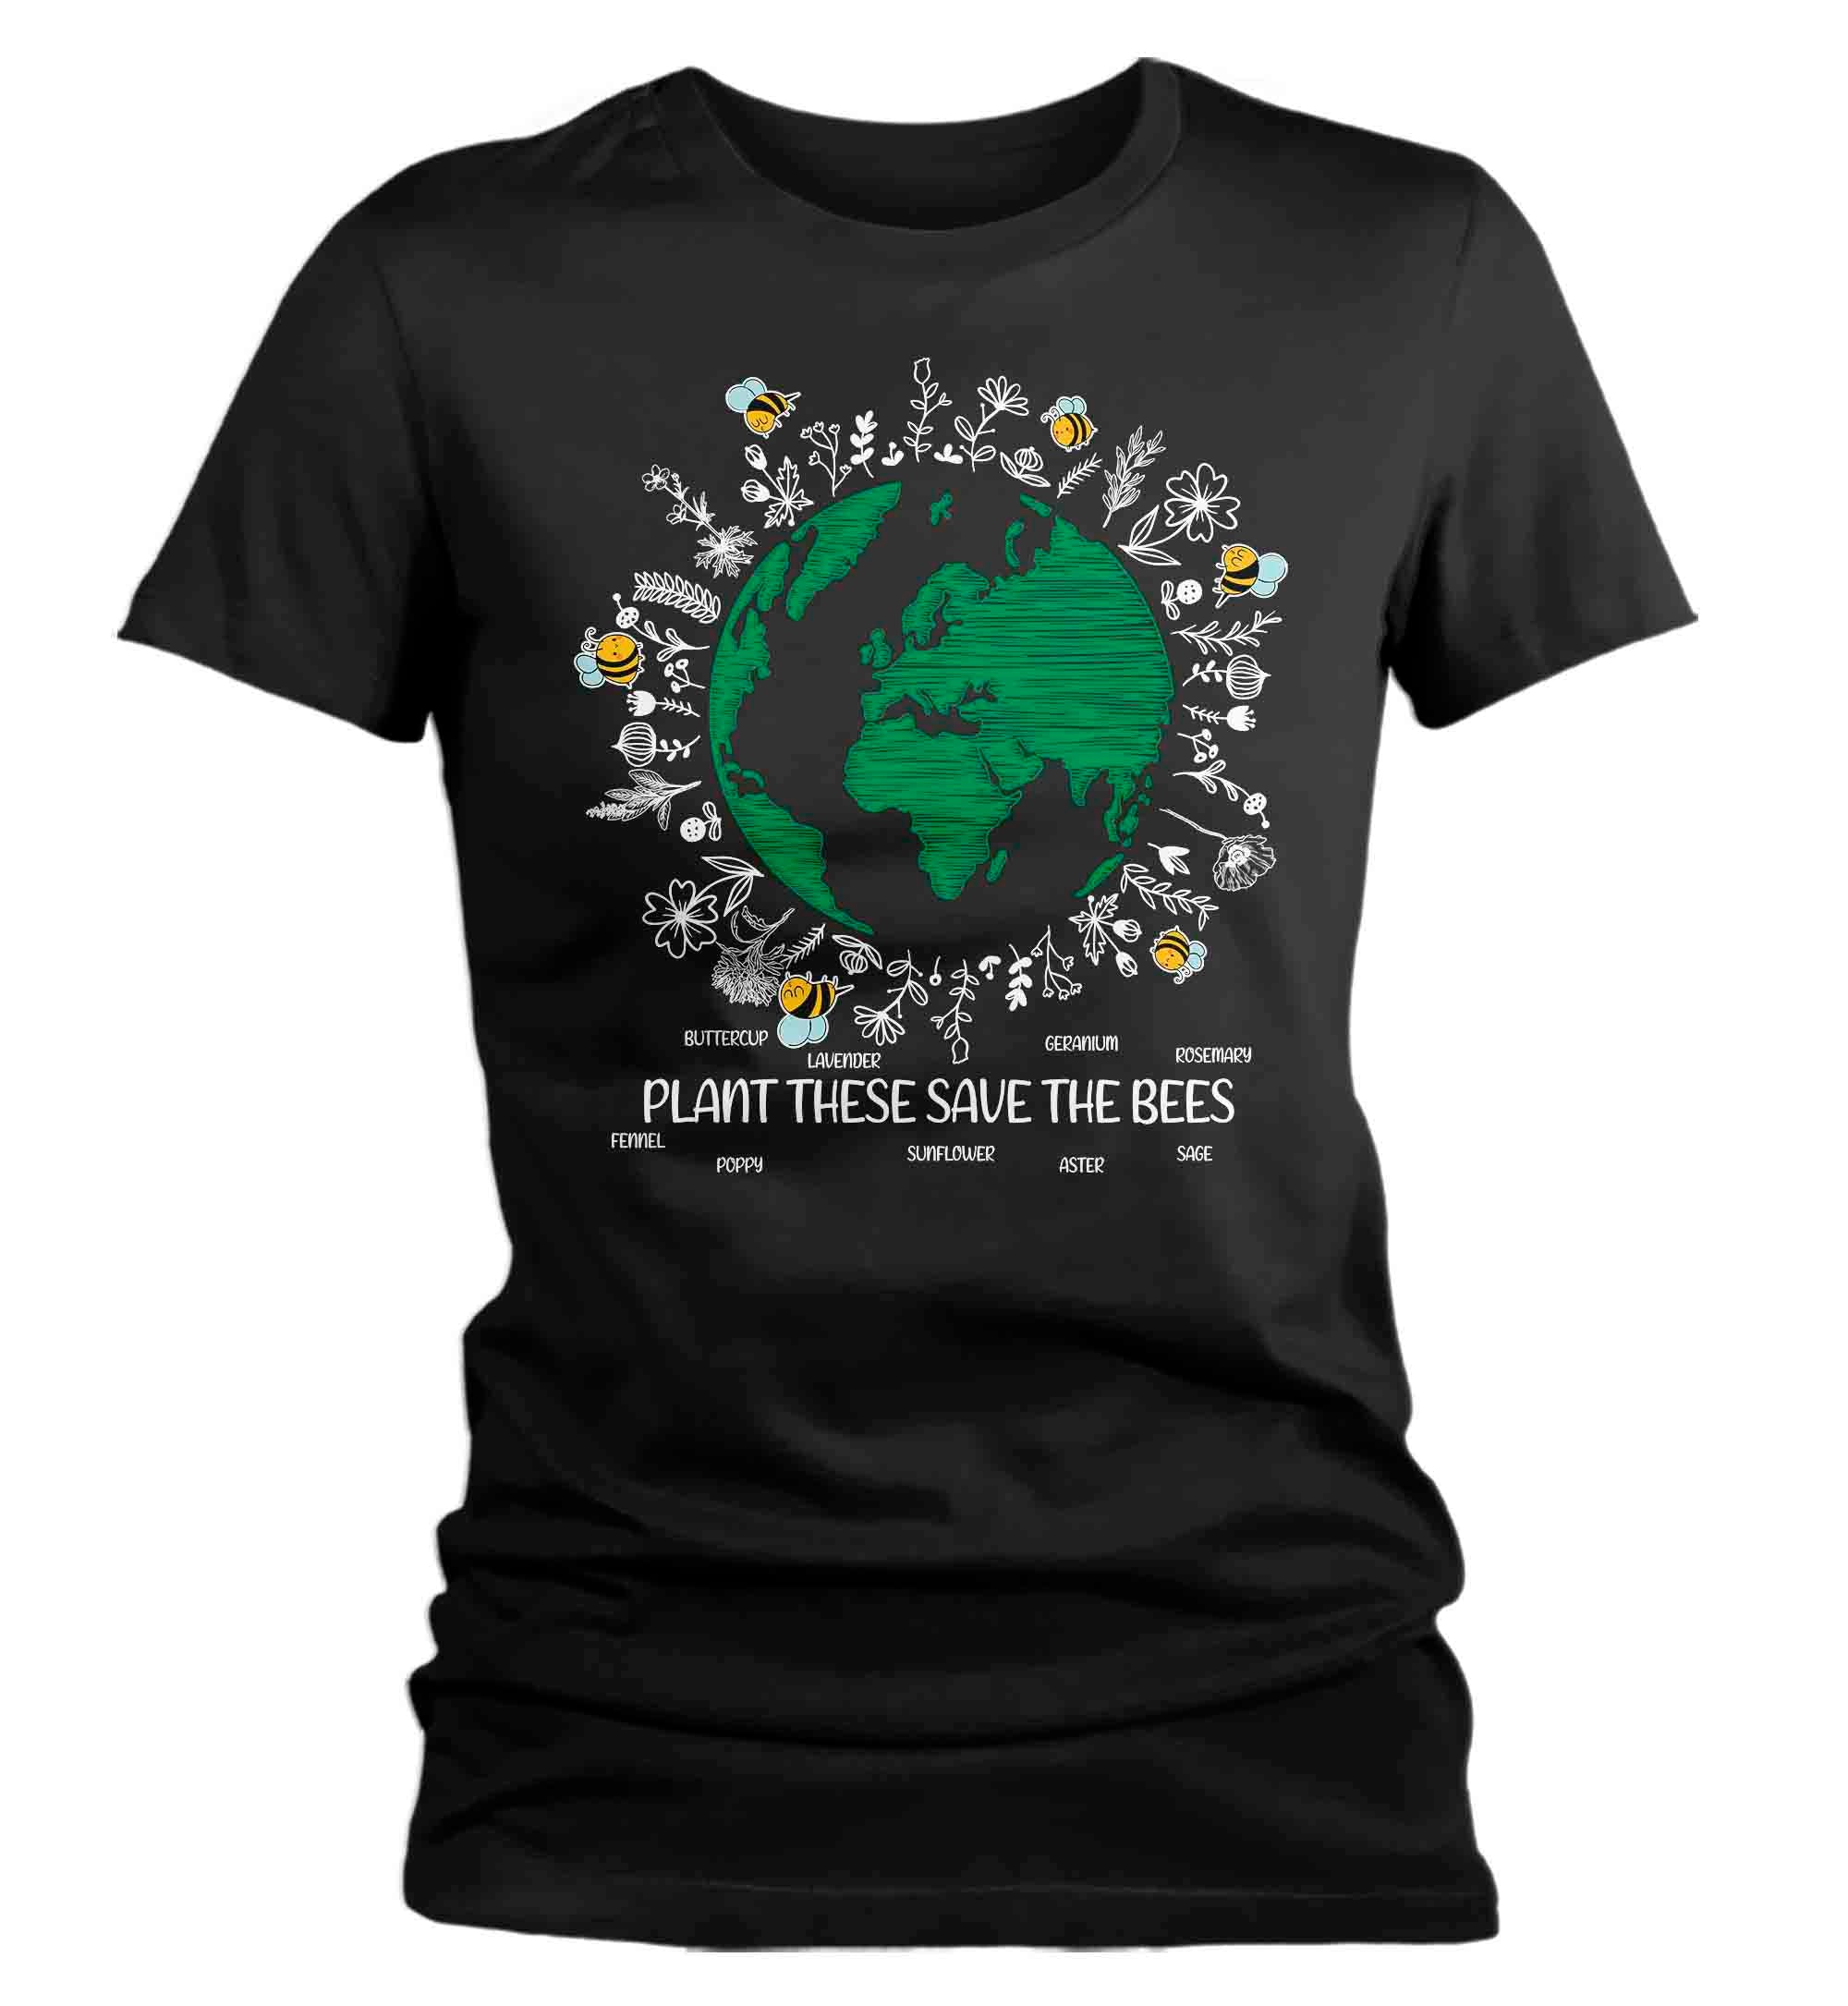 Women’S Earth Day Shirt Plant These T Shirt Forest Farming Save The Bees Climate Change Global Warming Gift Shirt Ladies Woman Tshirt